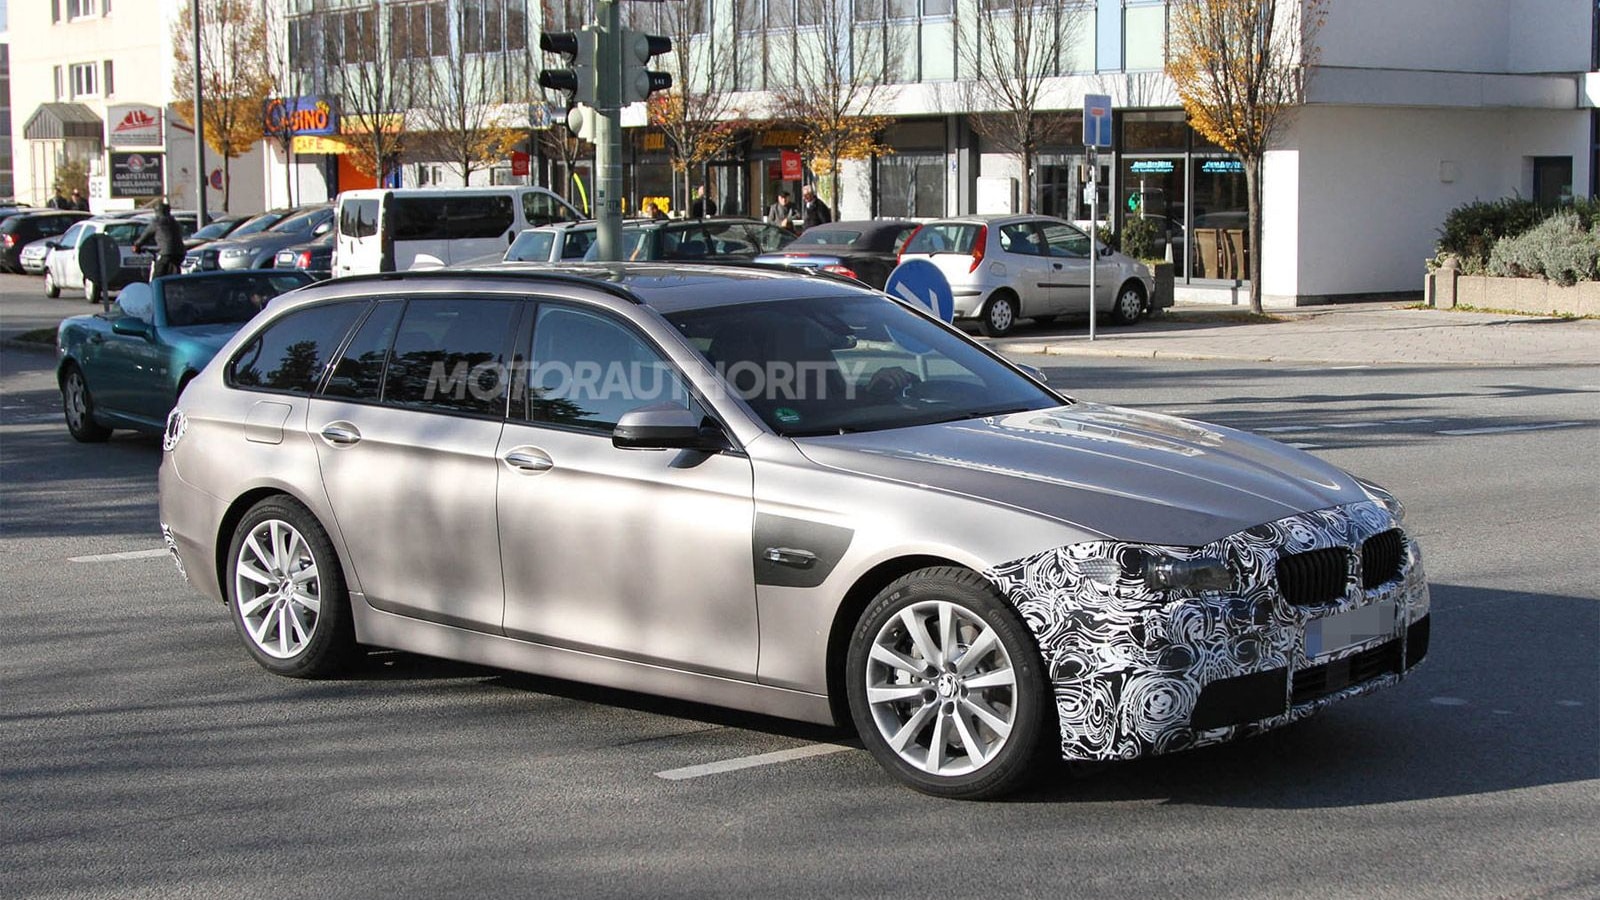 2014 BMW 5-Series Touring facelift spy shots